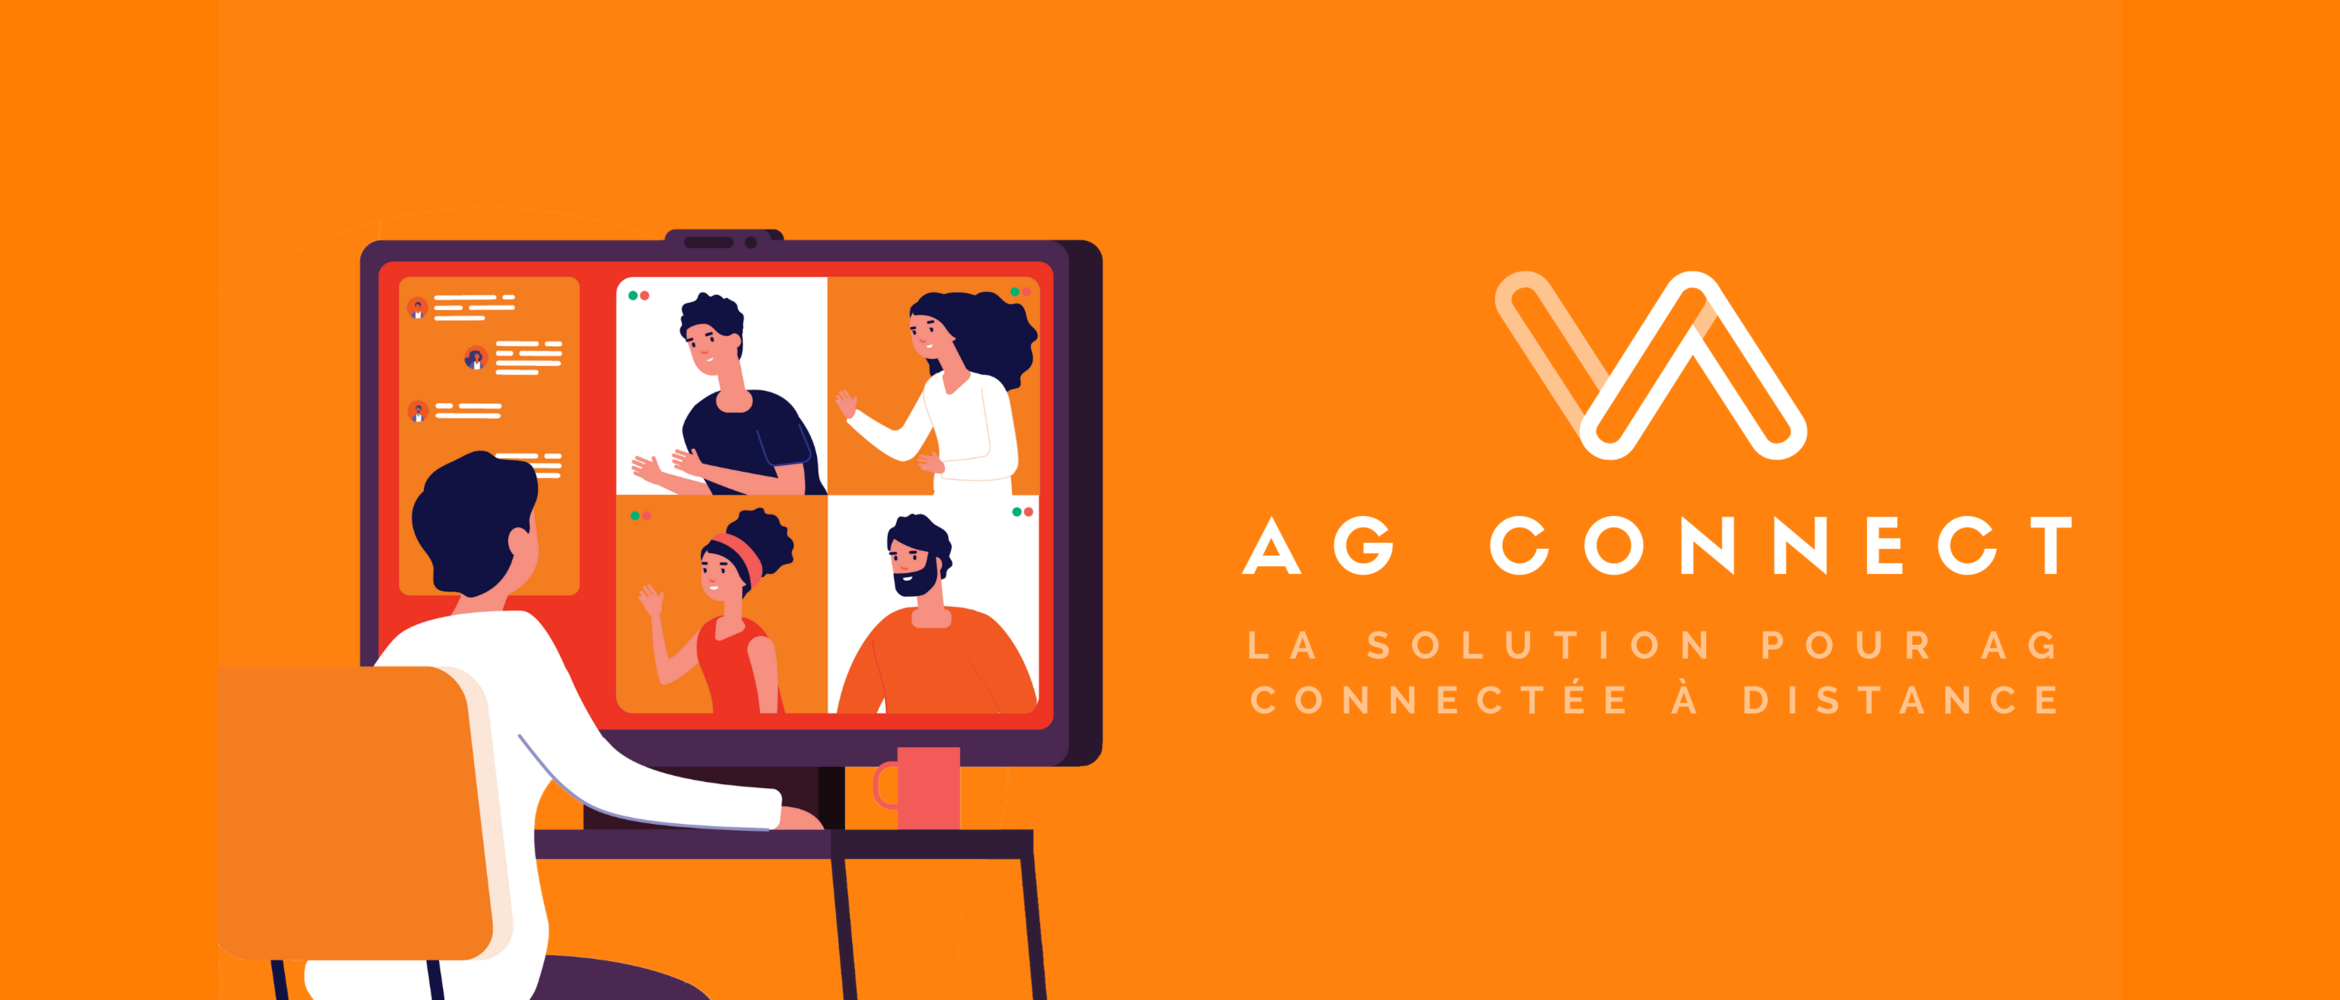 AG CONNECT